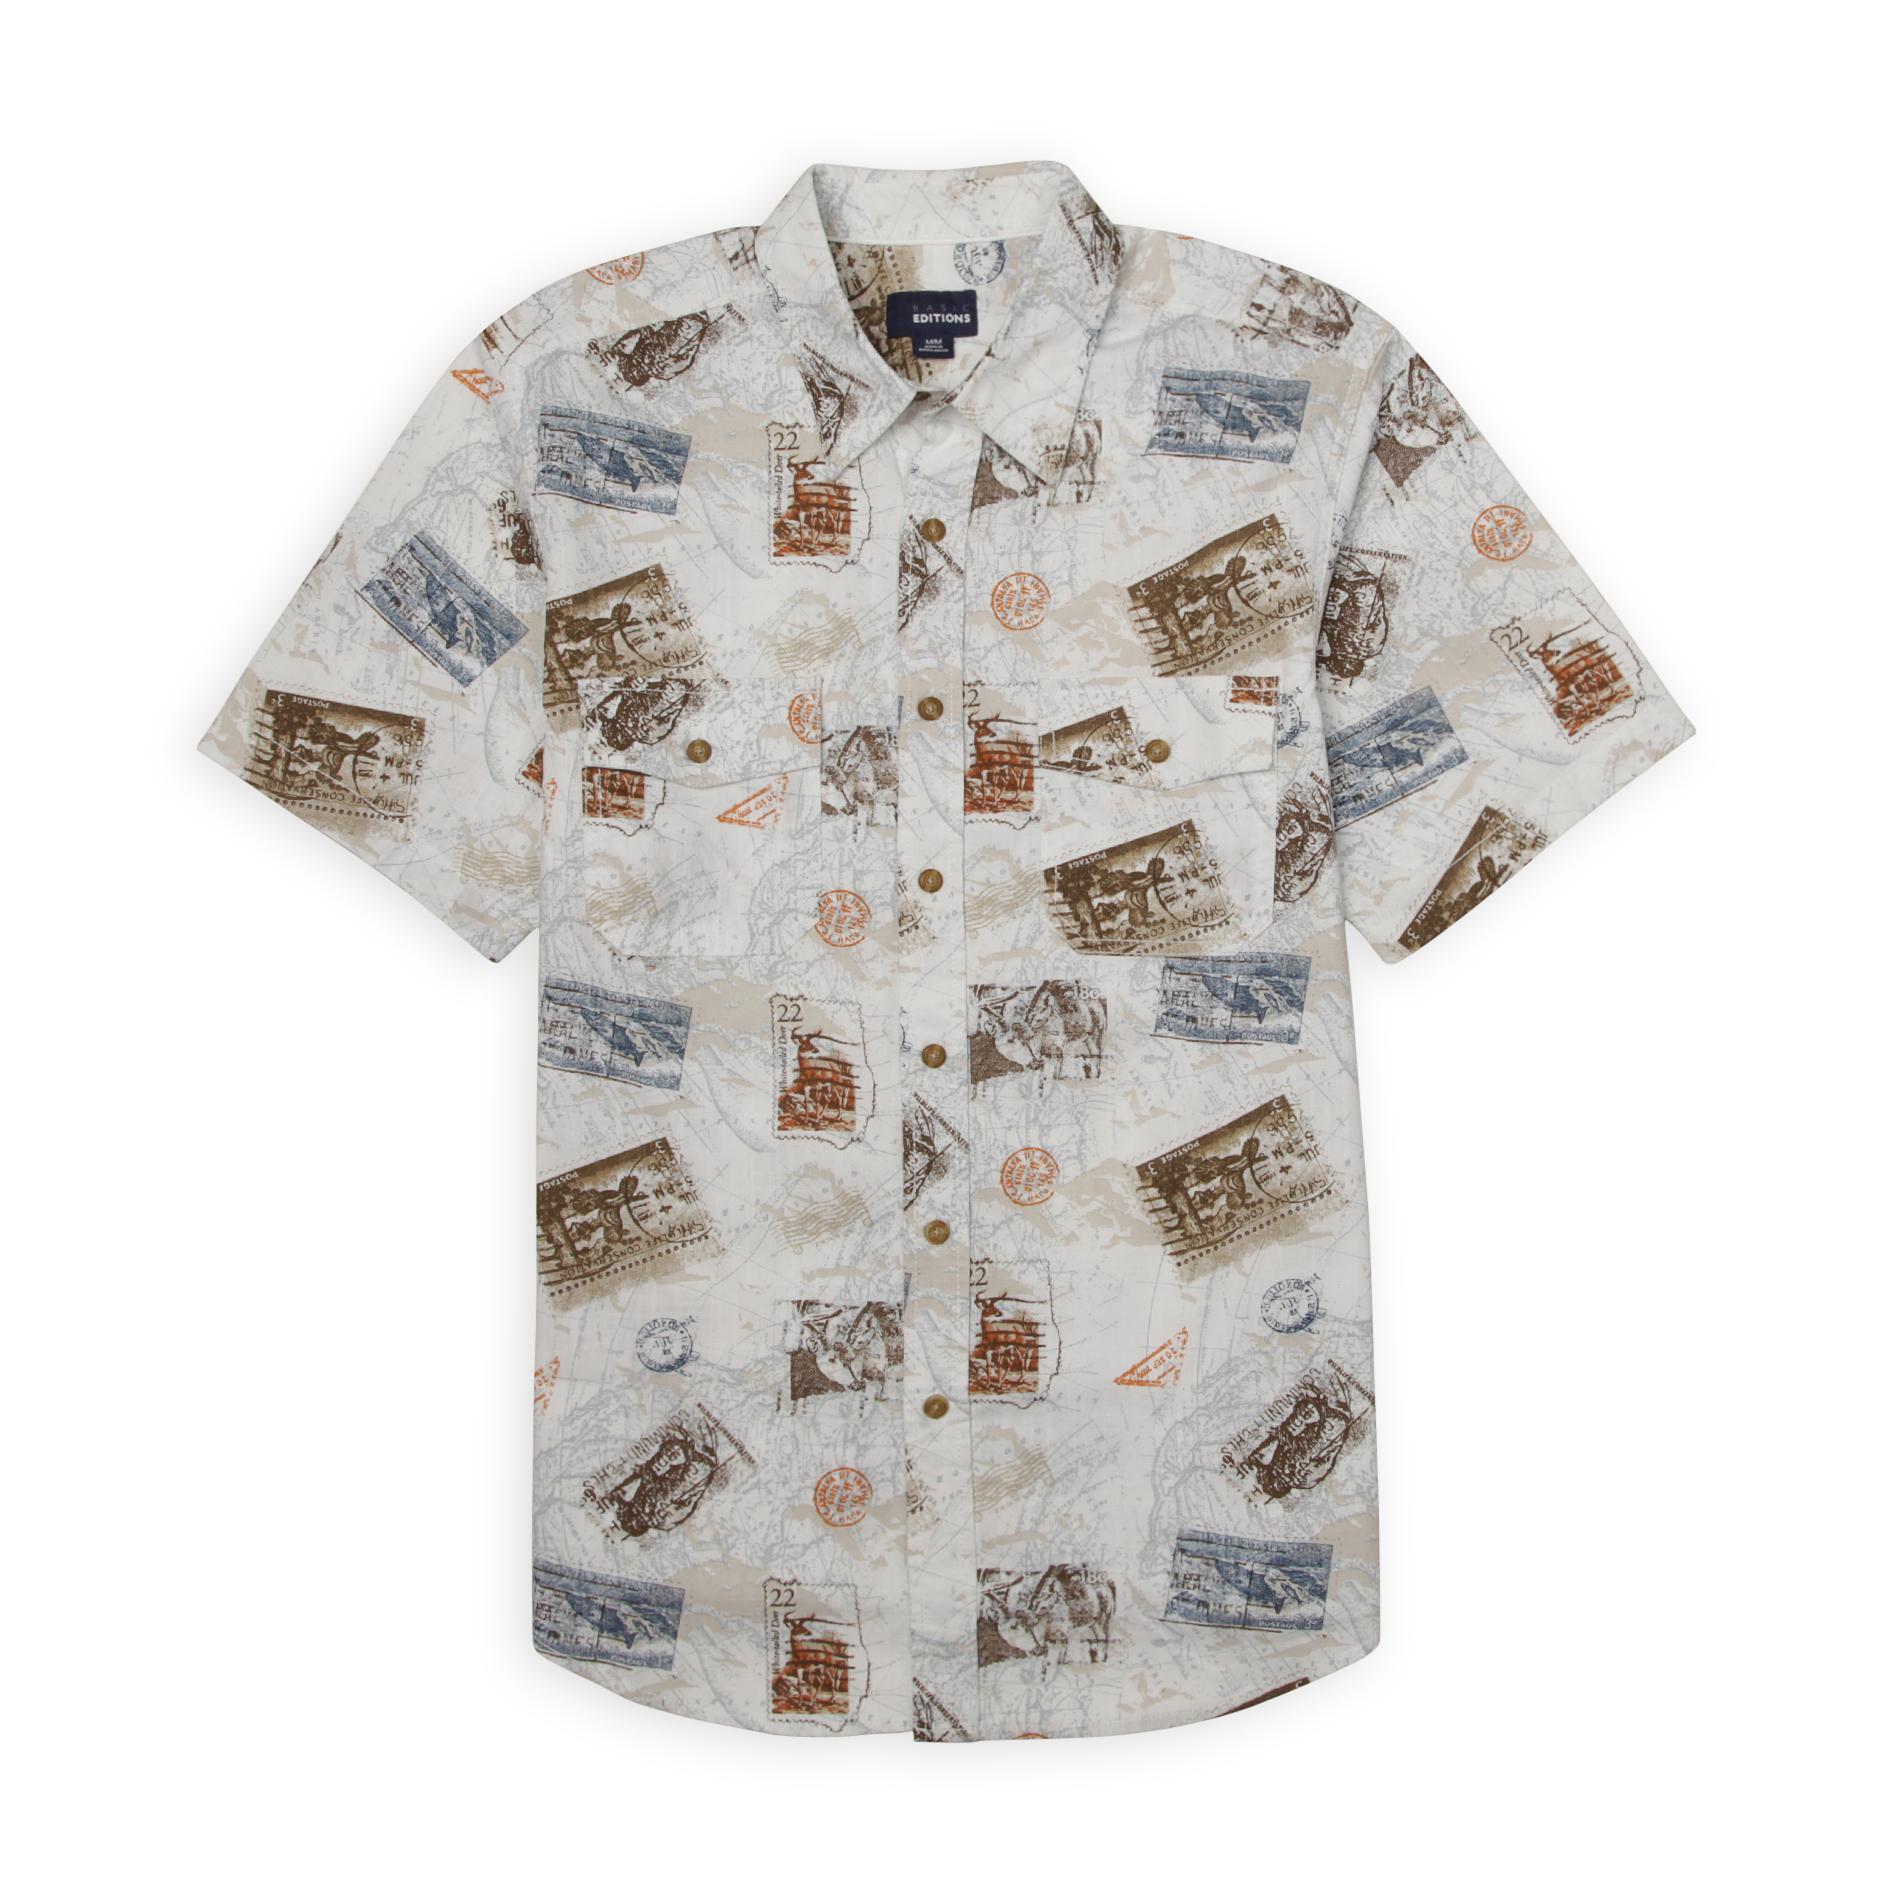 Basic Editions Men's Short-Sleeve Button-Front Shirt - Stamps